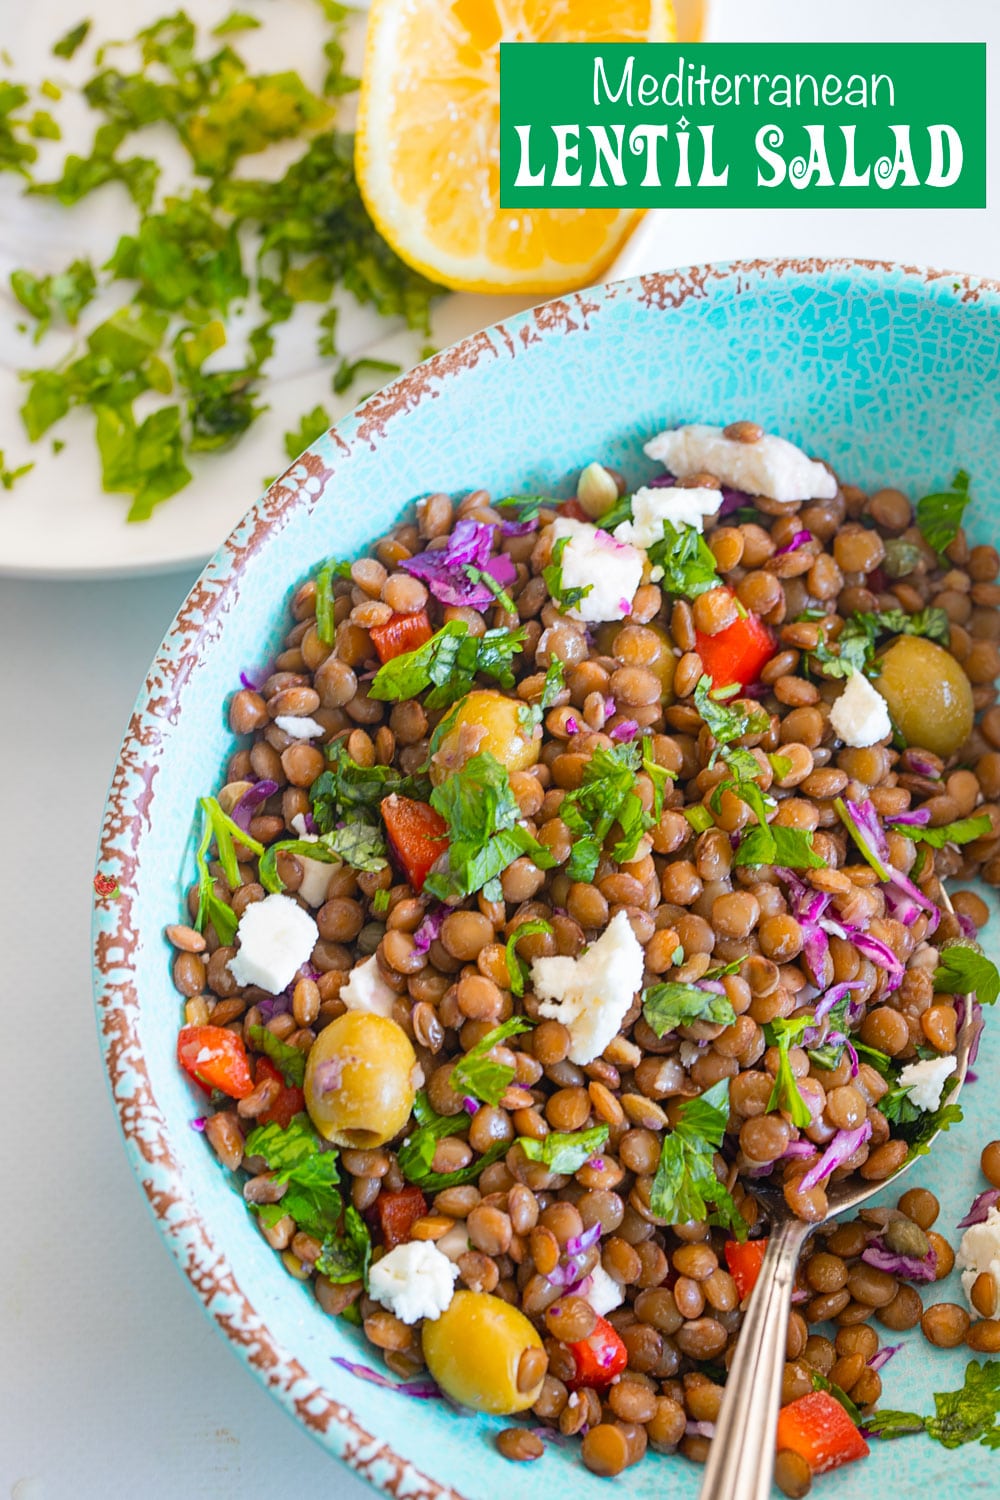 Top view of lentil salad in a light blue bowl with a spoon next to it